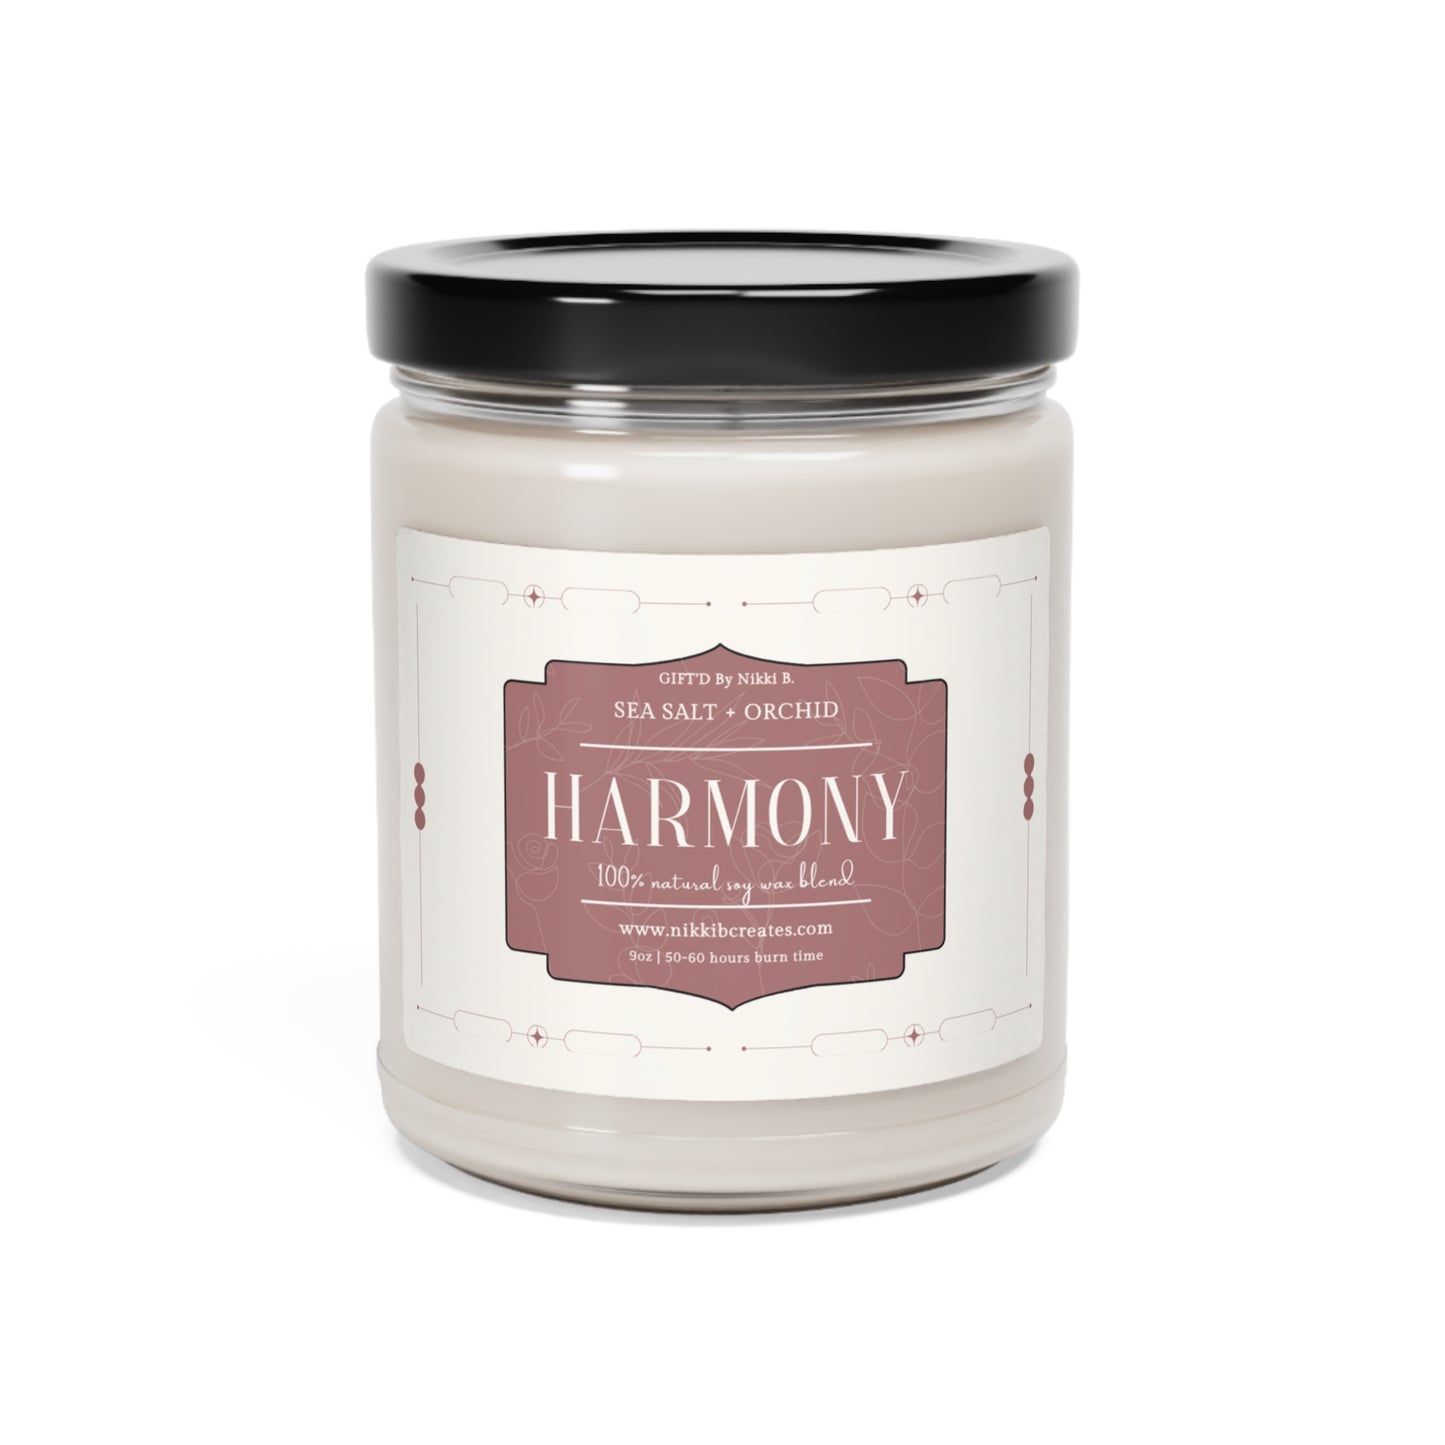 HARMONY Scented Candle, 9oz